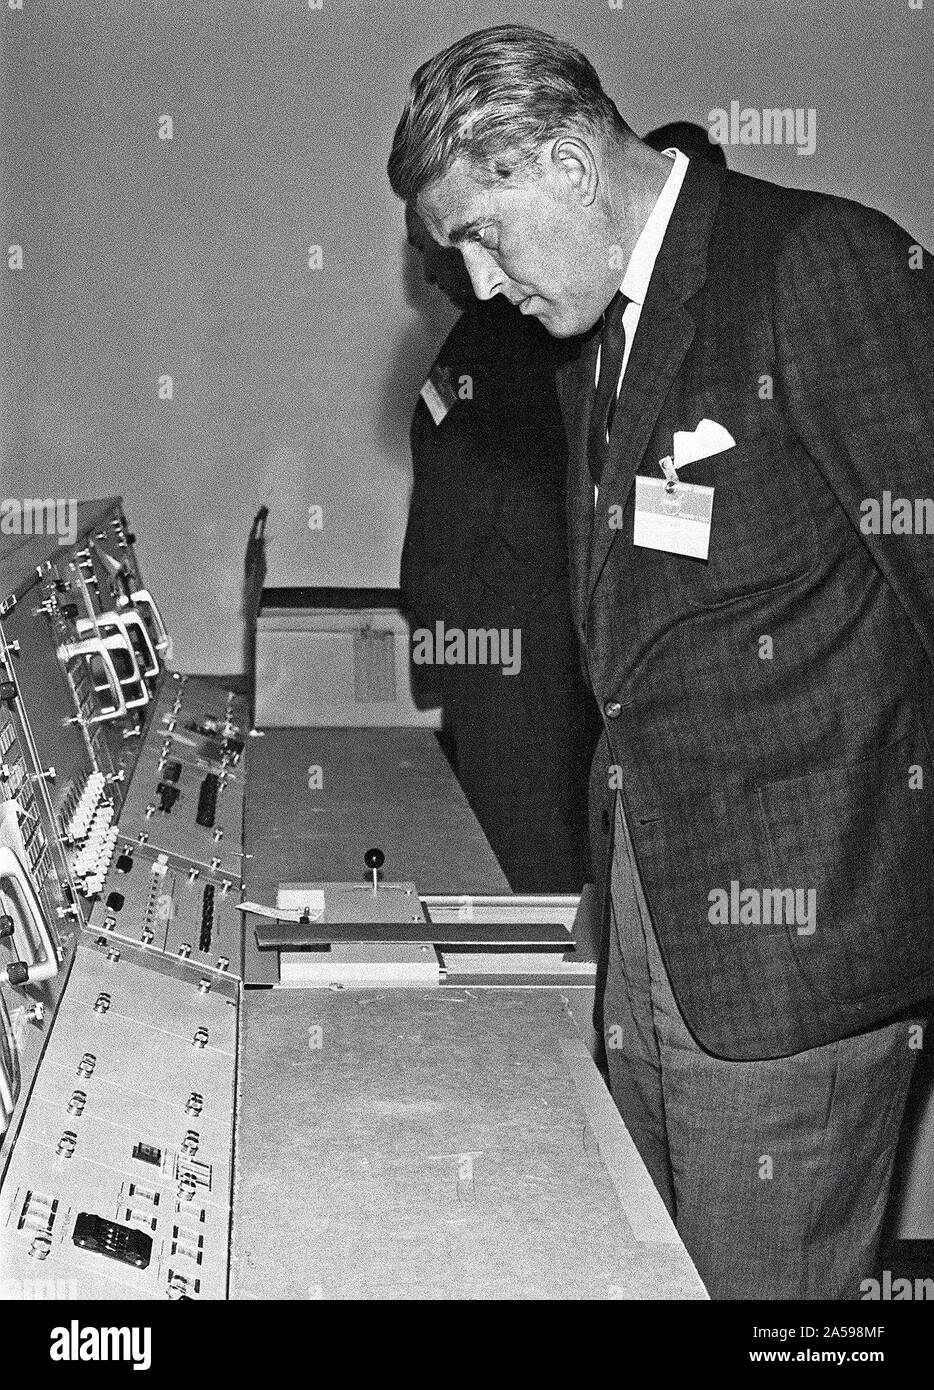 This photograph, dated October 14, 1964, was taken at the Marned Spacecraft Center, now the Johnson Space Center in Houston, Texas. Dr. von Braun is shown looking over consoles in the Manned Spaceflight Control Center. Stock Photo